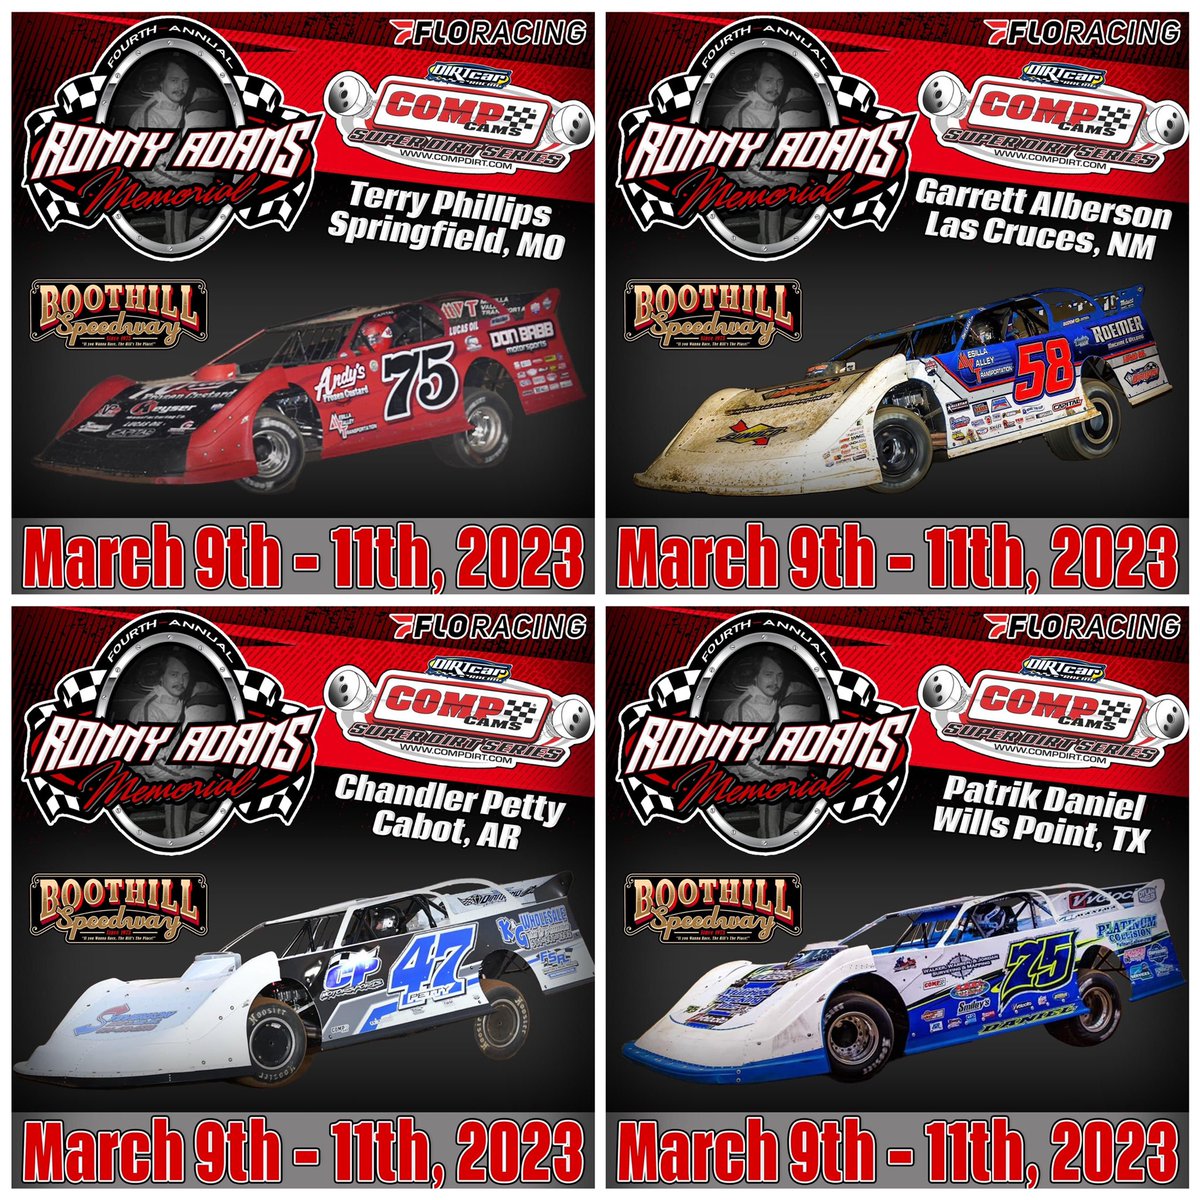 The Ronny Adams Memorial at Boothill Speedway is coming up in just two days!